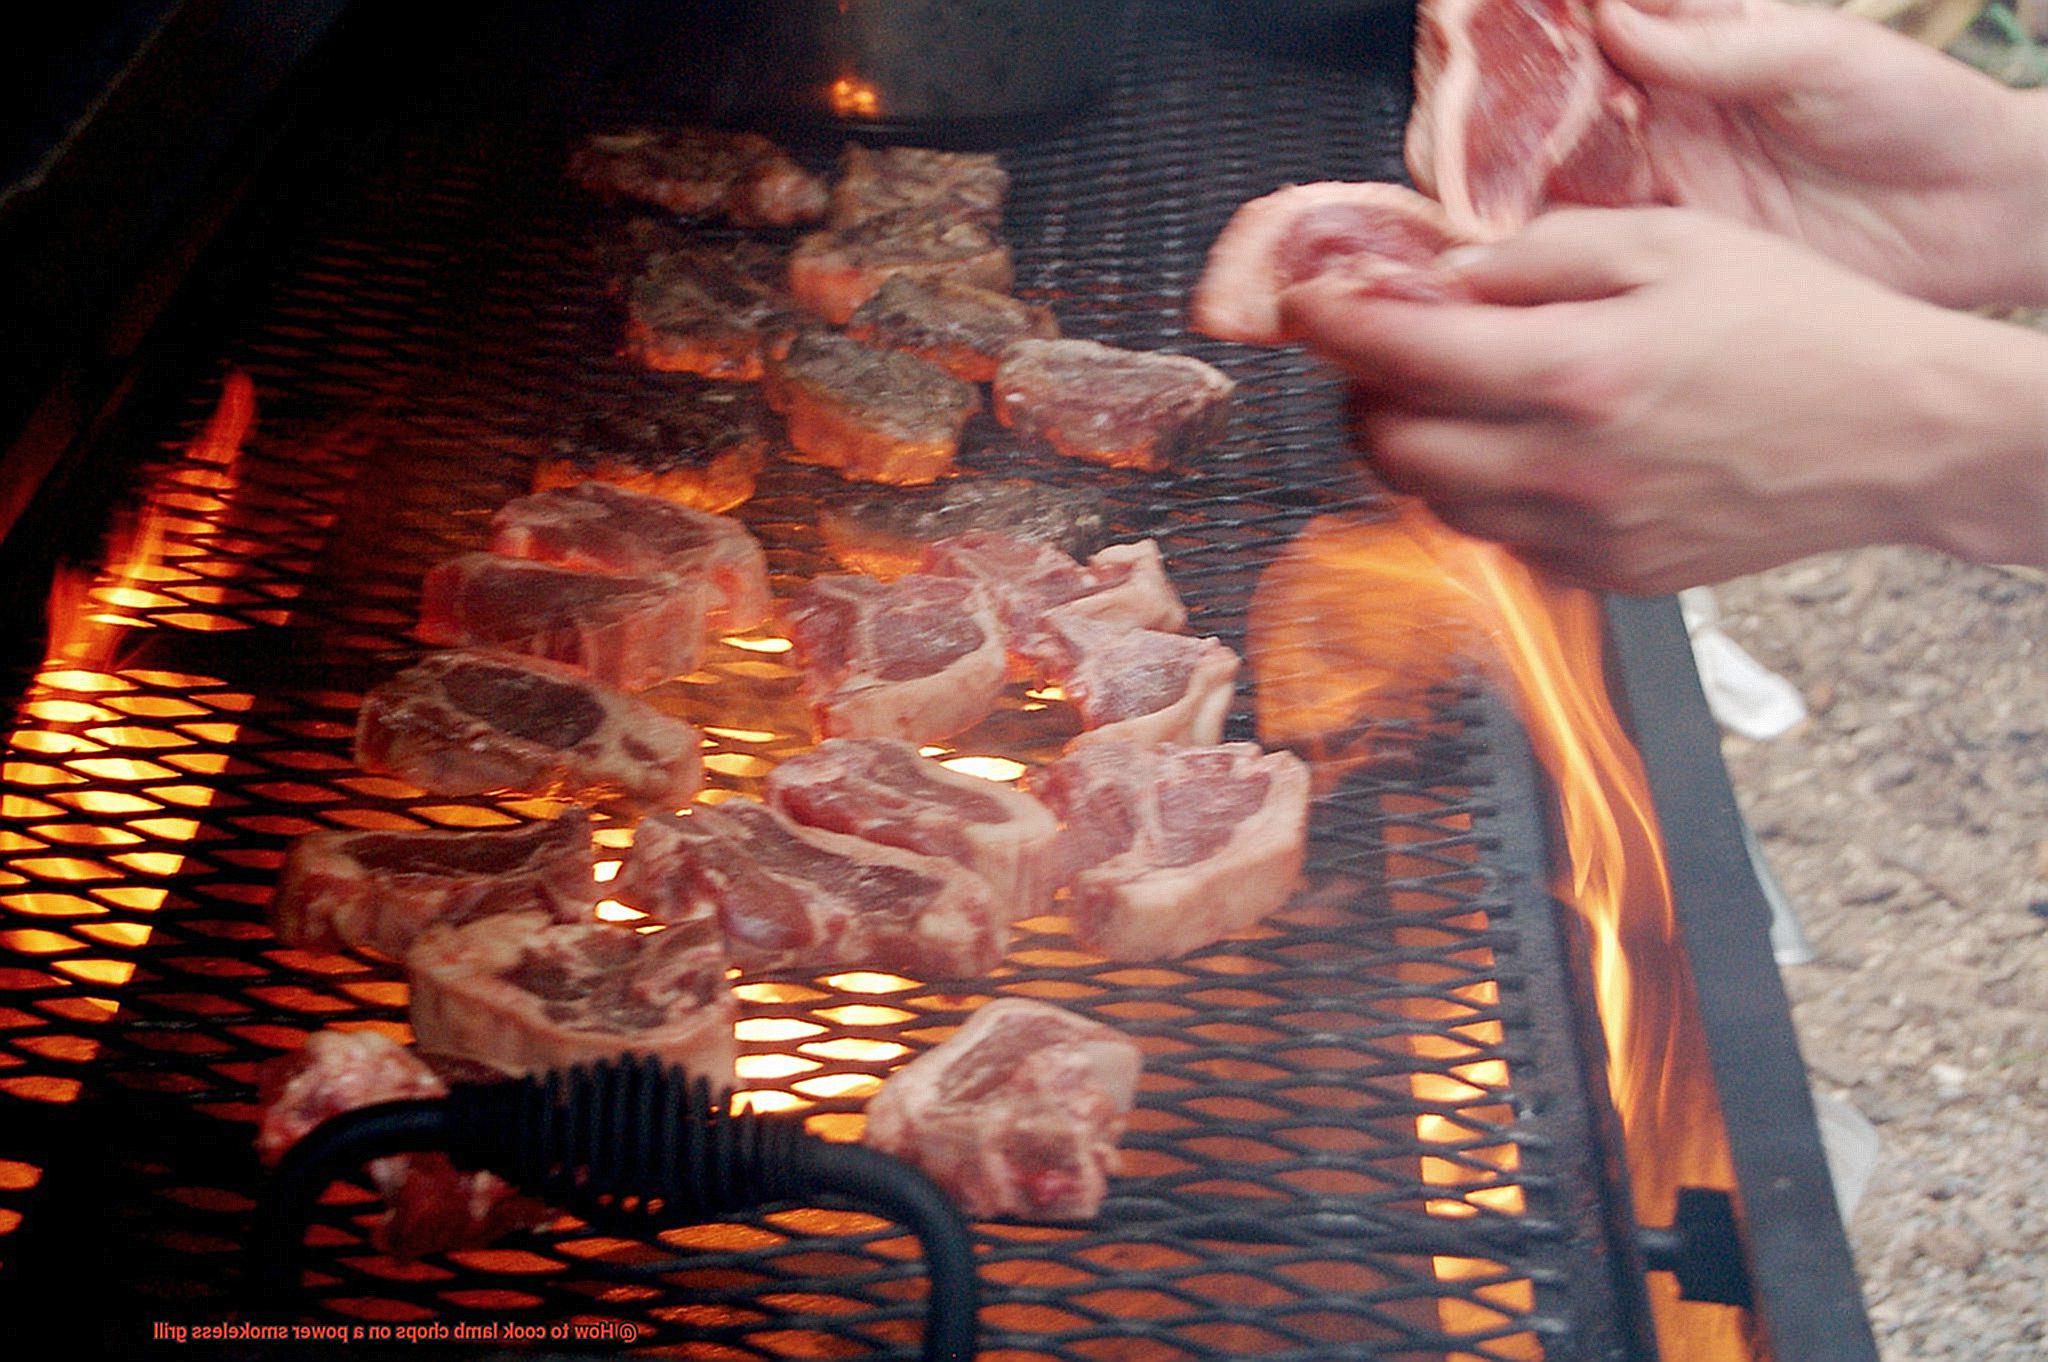 How to cook lamb chops on a power smokeless grill-3